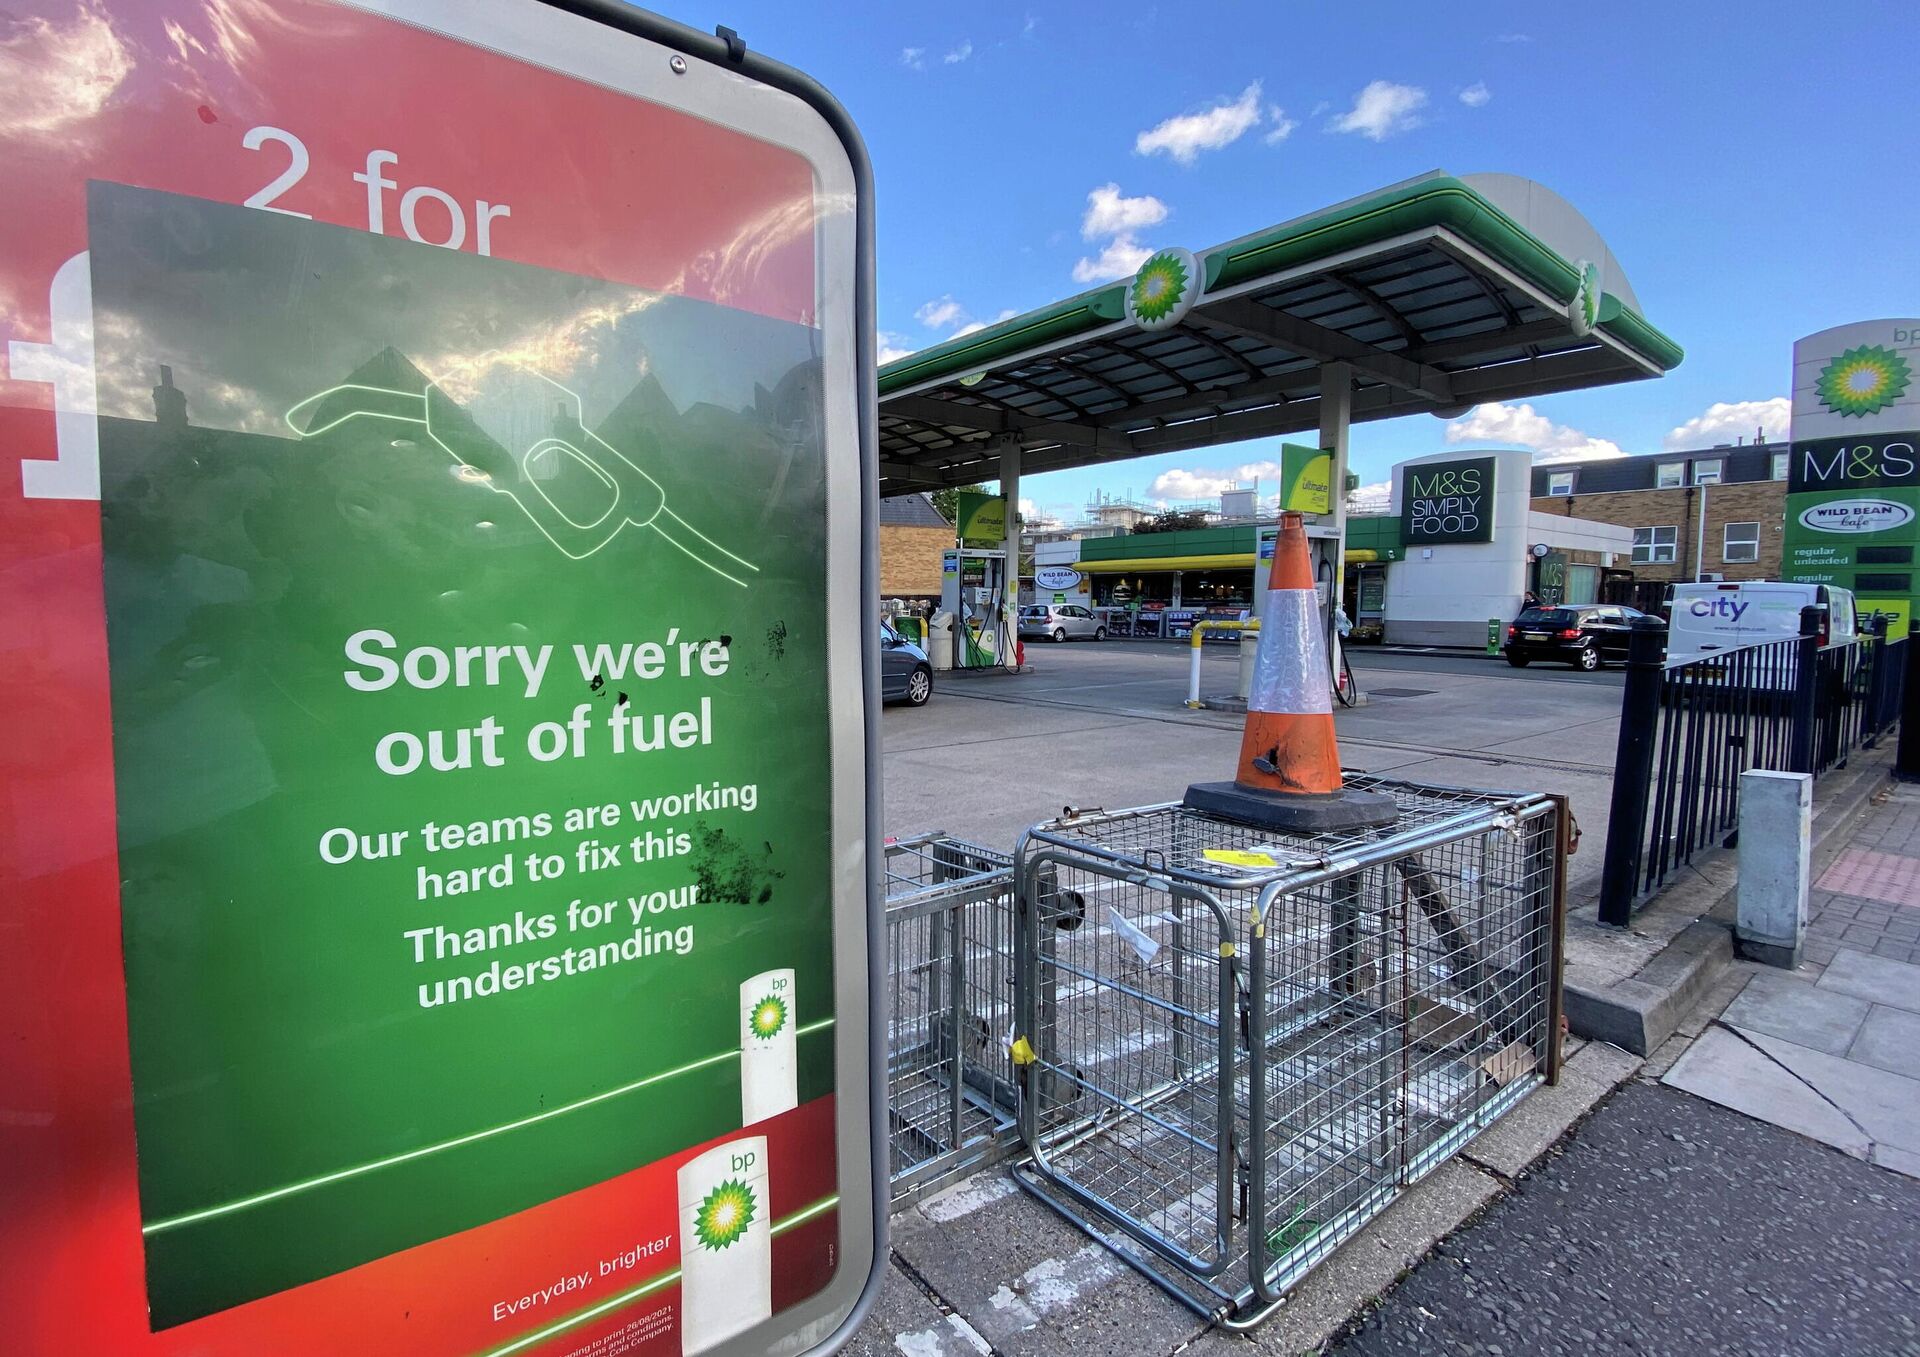 A BP petrol station that has run out of fuel is seen in south London, Britain - Sputnik International, 1920, 28.09.2021